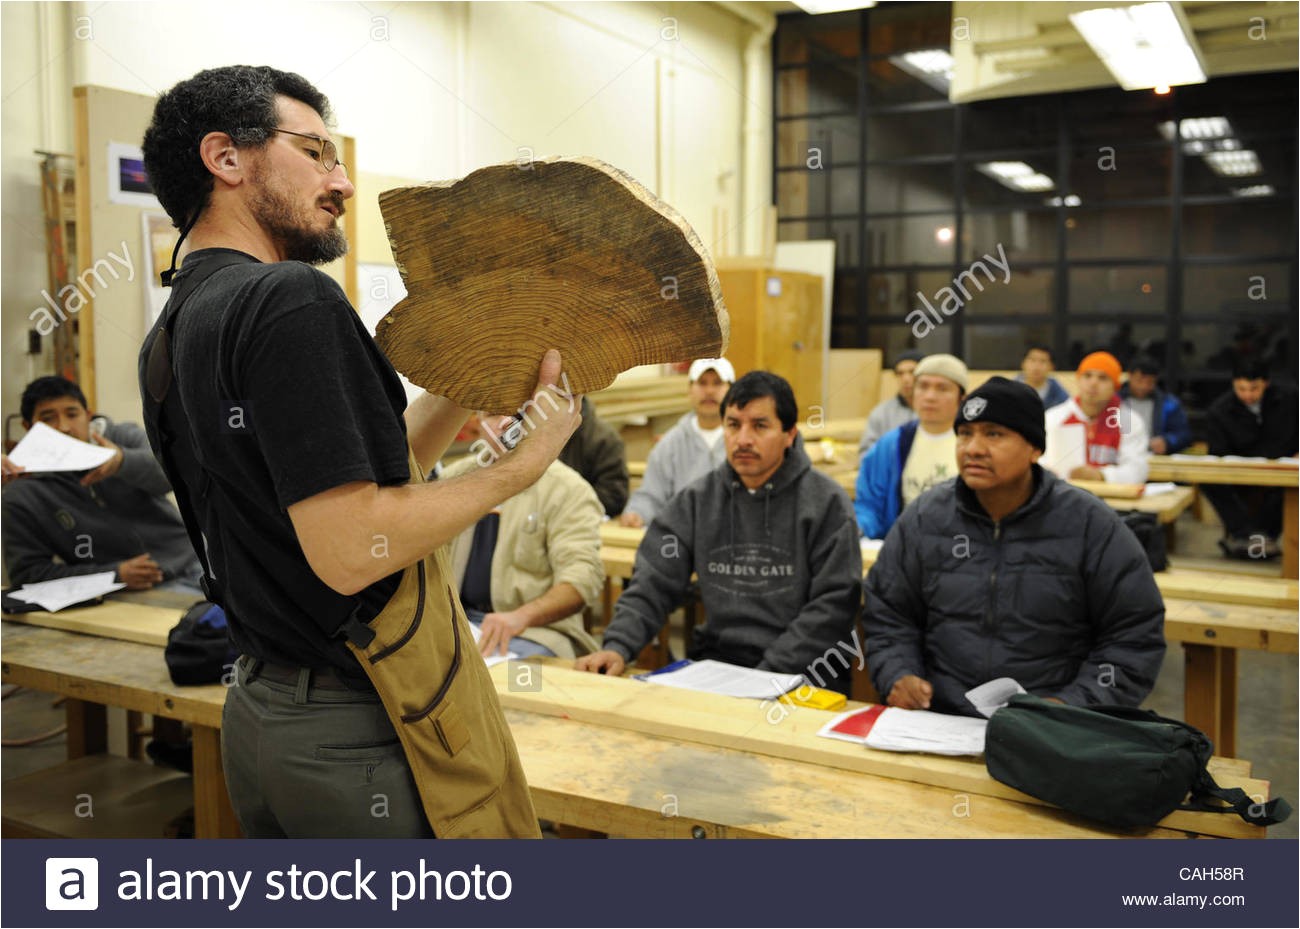 john mccormack teaches a bilingual cabinet making class at laney college january 9 2008 that targets spanish speakers many of whom already work day jobs